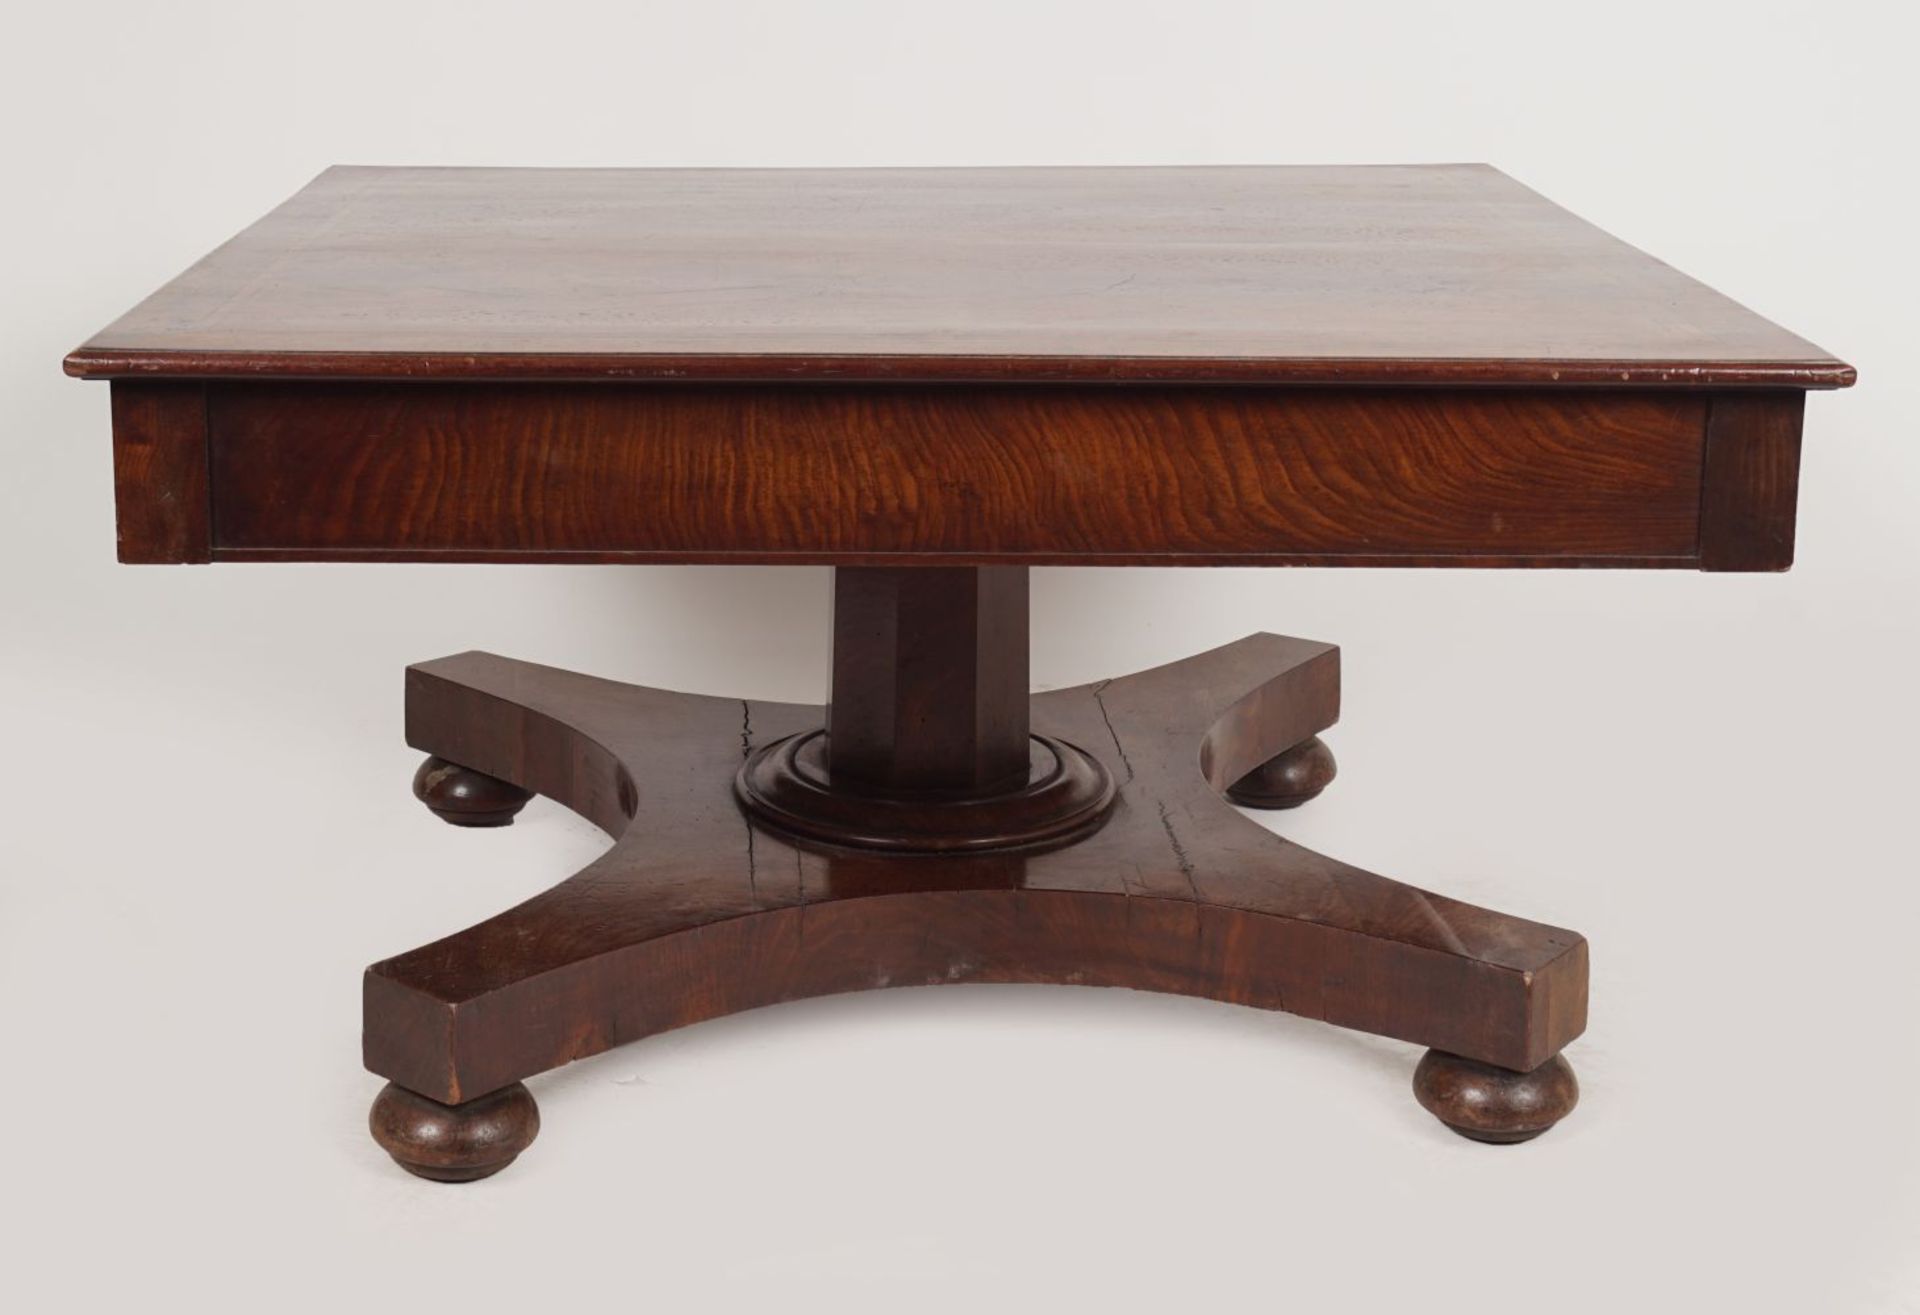 19TH-CENTURY MAHOGANY & CROSSBANDED COFFEE TABLE - Image 3 of 3